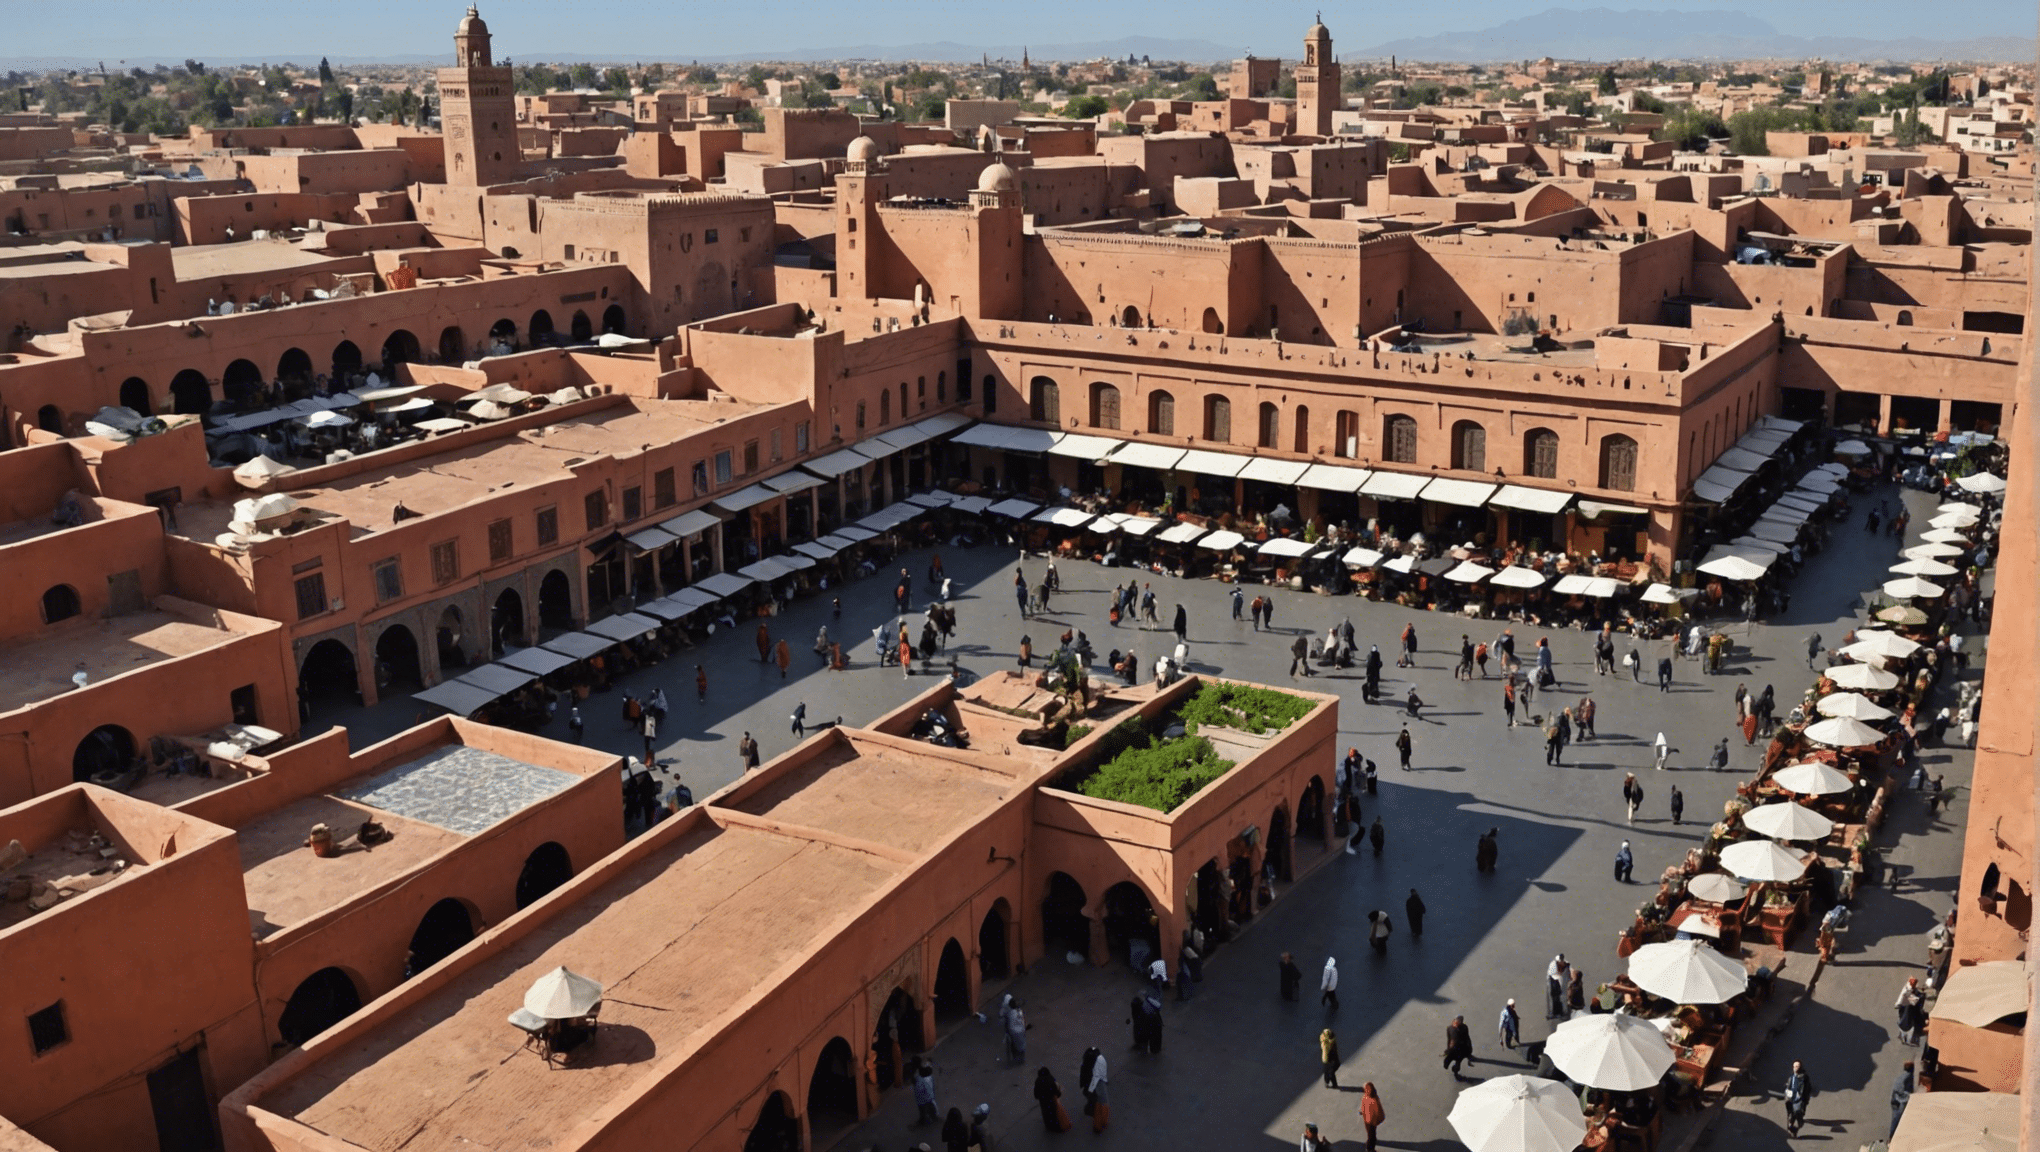 find out what the weather is like in marrakech in march. get accurate forecast and climate data to plan your trip and activities during this month.